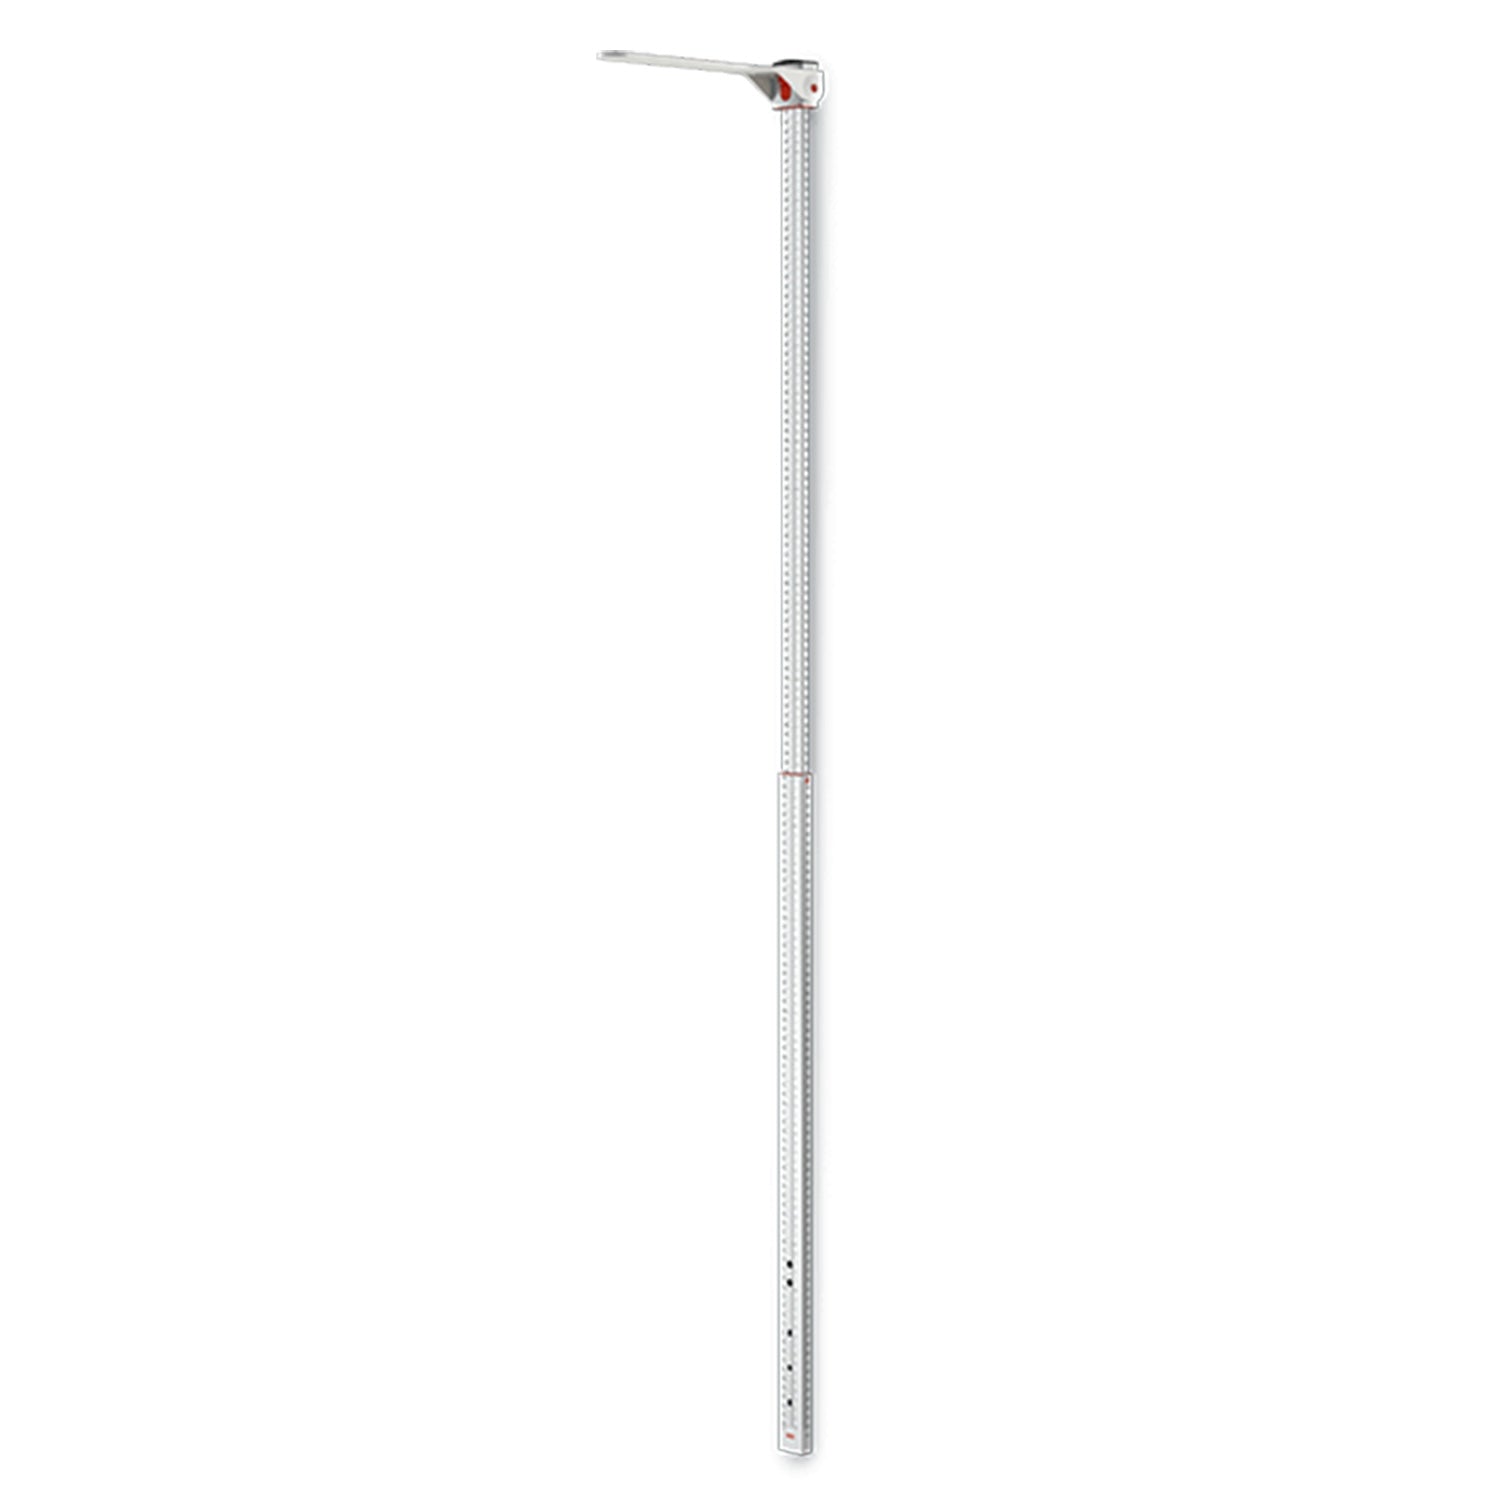 seca 224 Side-Mounted Telescopic Measuring Rod for Column Scales